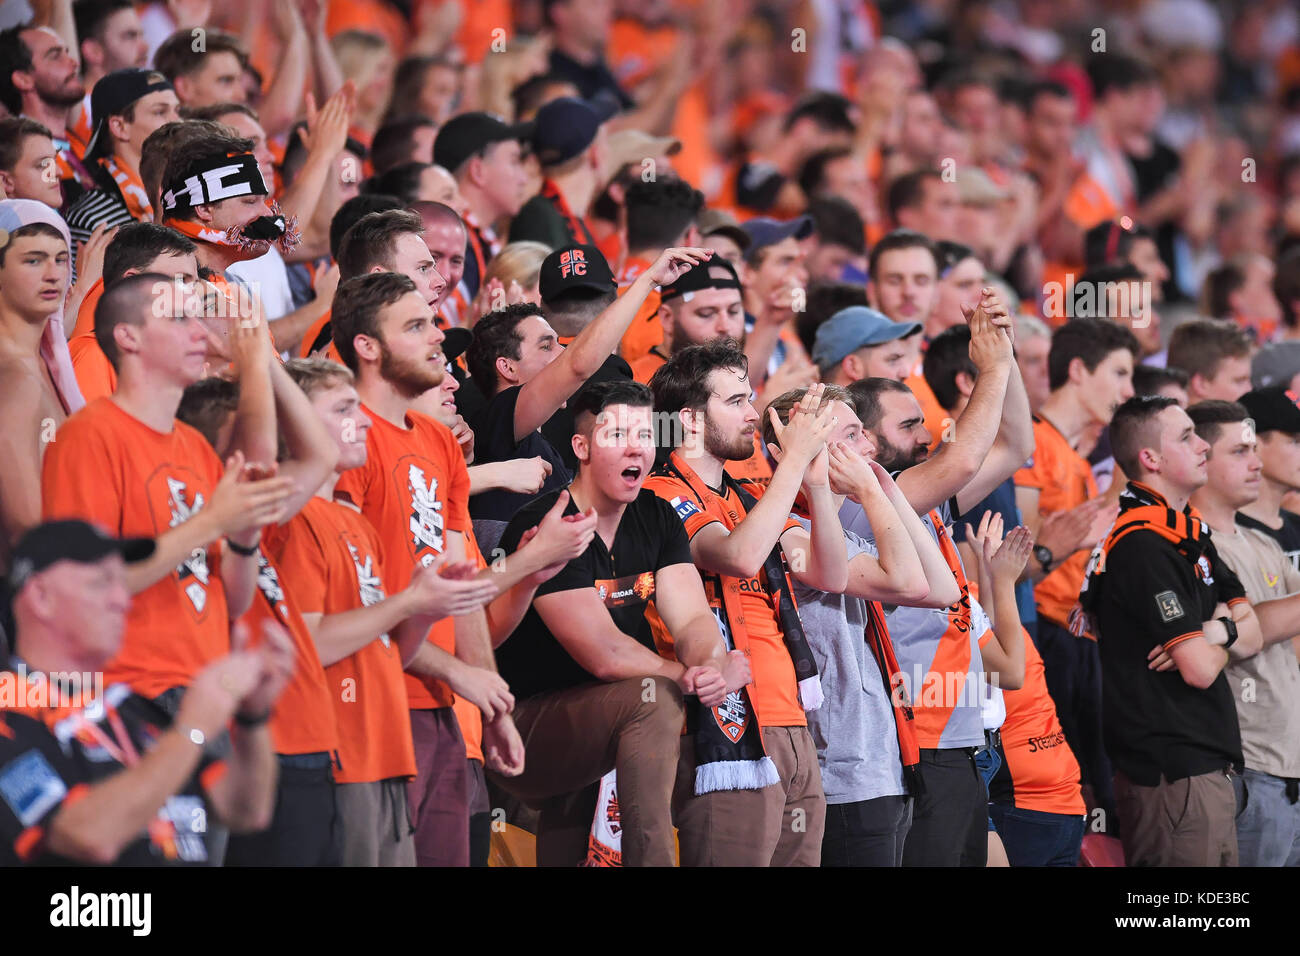 Brisbane, QUEENSLAND, AUSTRALIA. 13th Oct, 2017. Brisbane Roar fans show  their support during the round two A-League match between the Brisbane Roar  and Adelaide United at Suncorp Stadium on October 13, 2017